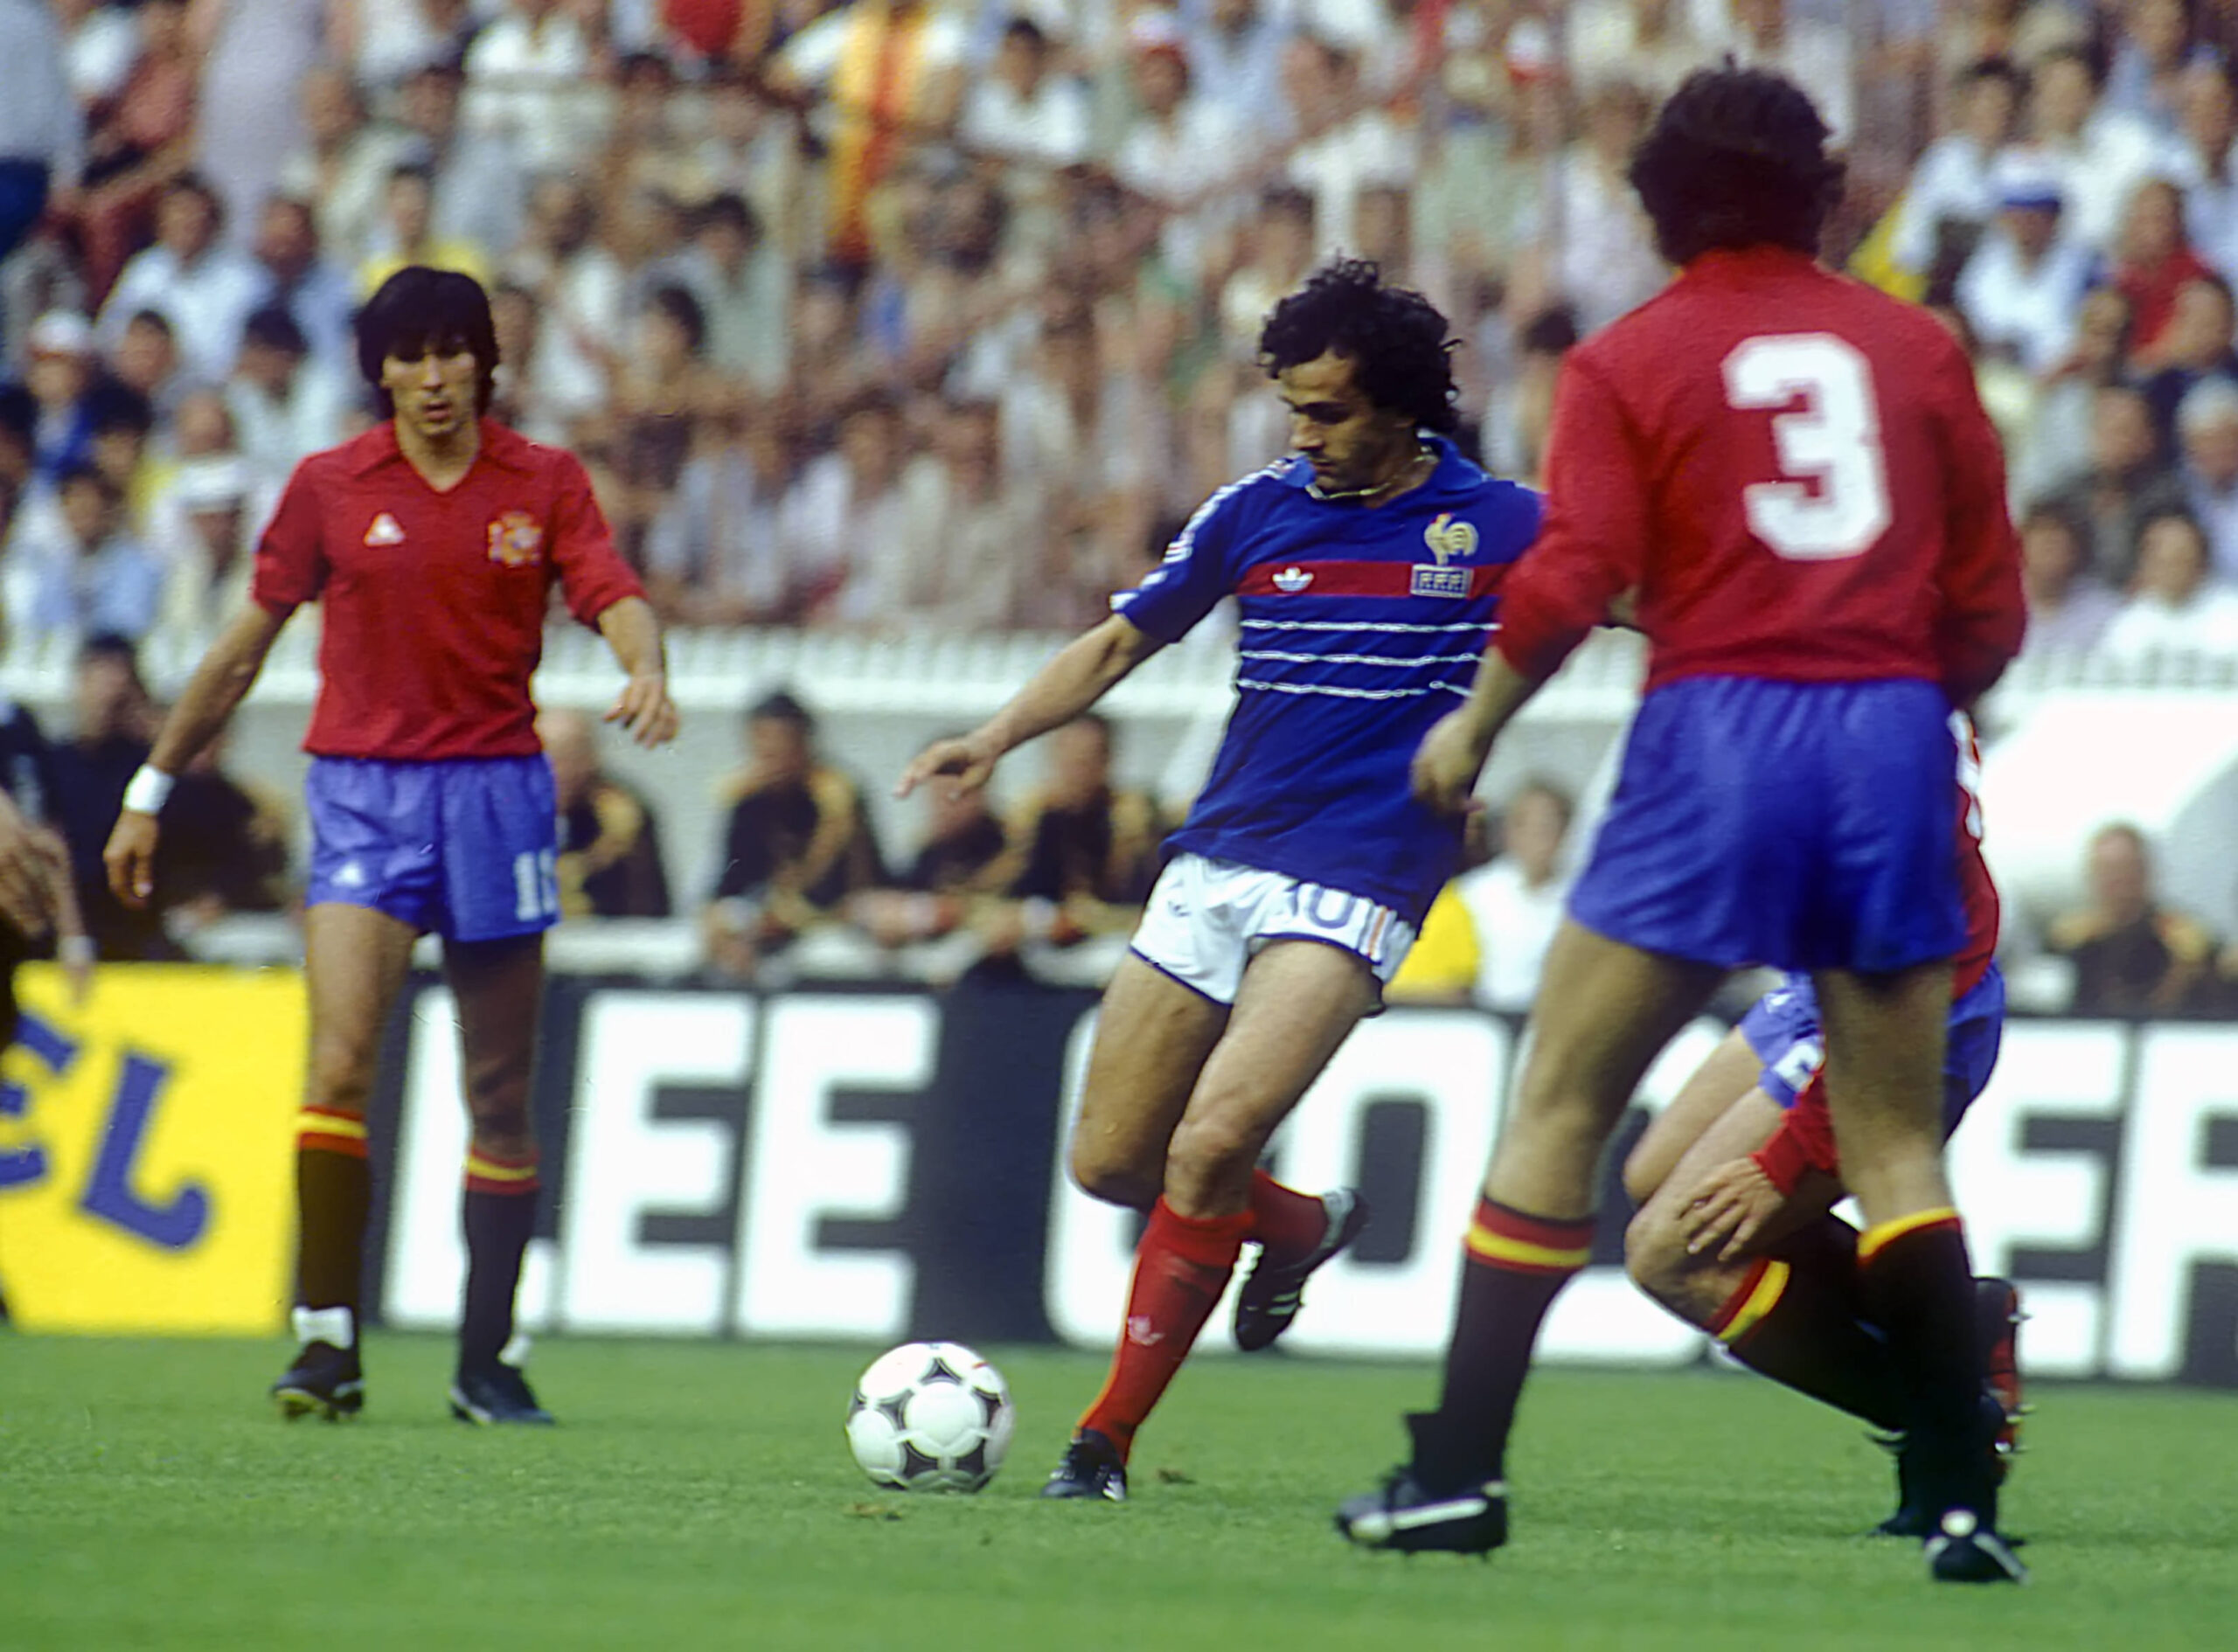 Michel Platini playing at the Euro 1984 final against Spain.